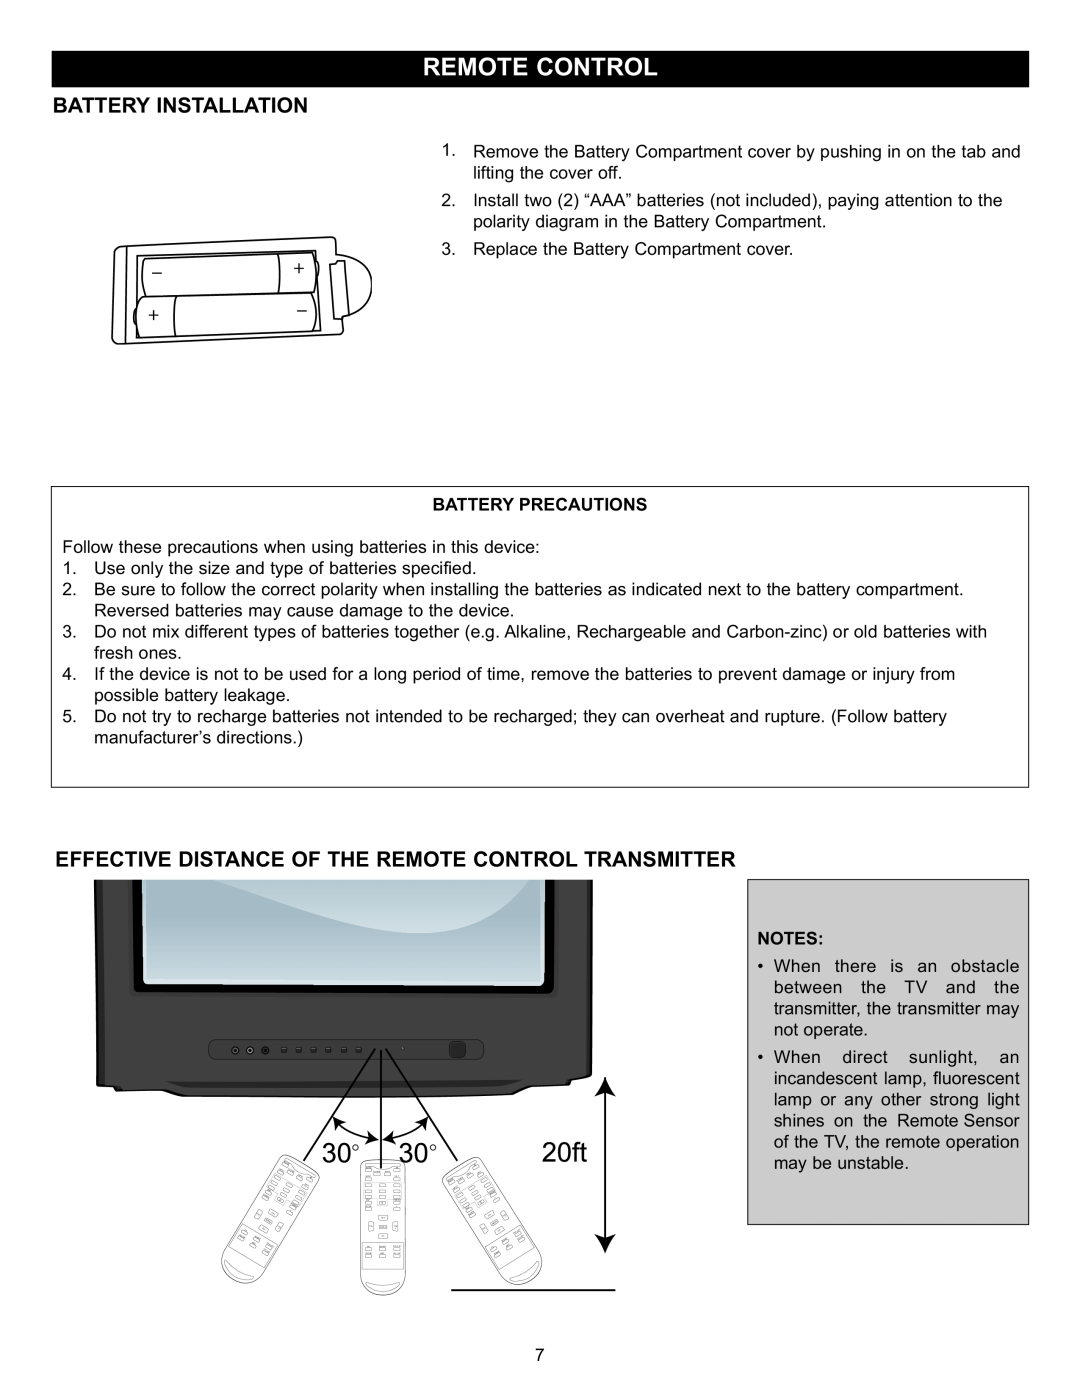 Memorex MT2028D-BLK manual Battery Installation, Effective Distance Of The Remote Control Transmitter, Battery Precautions 